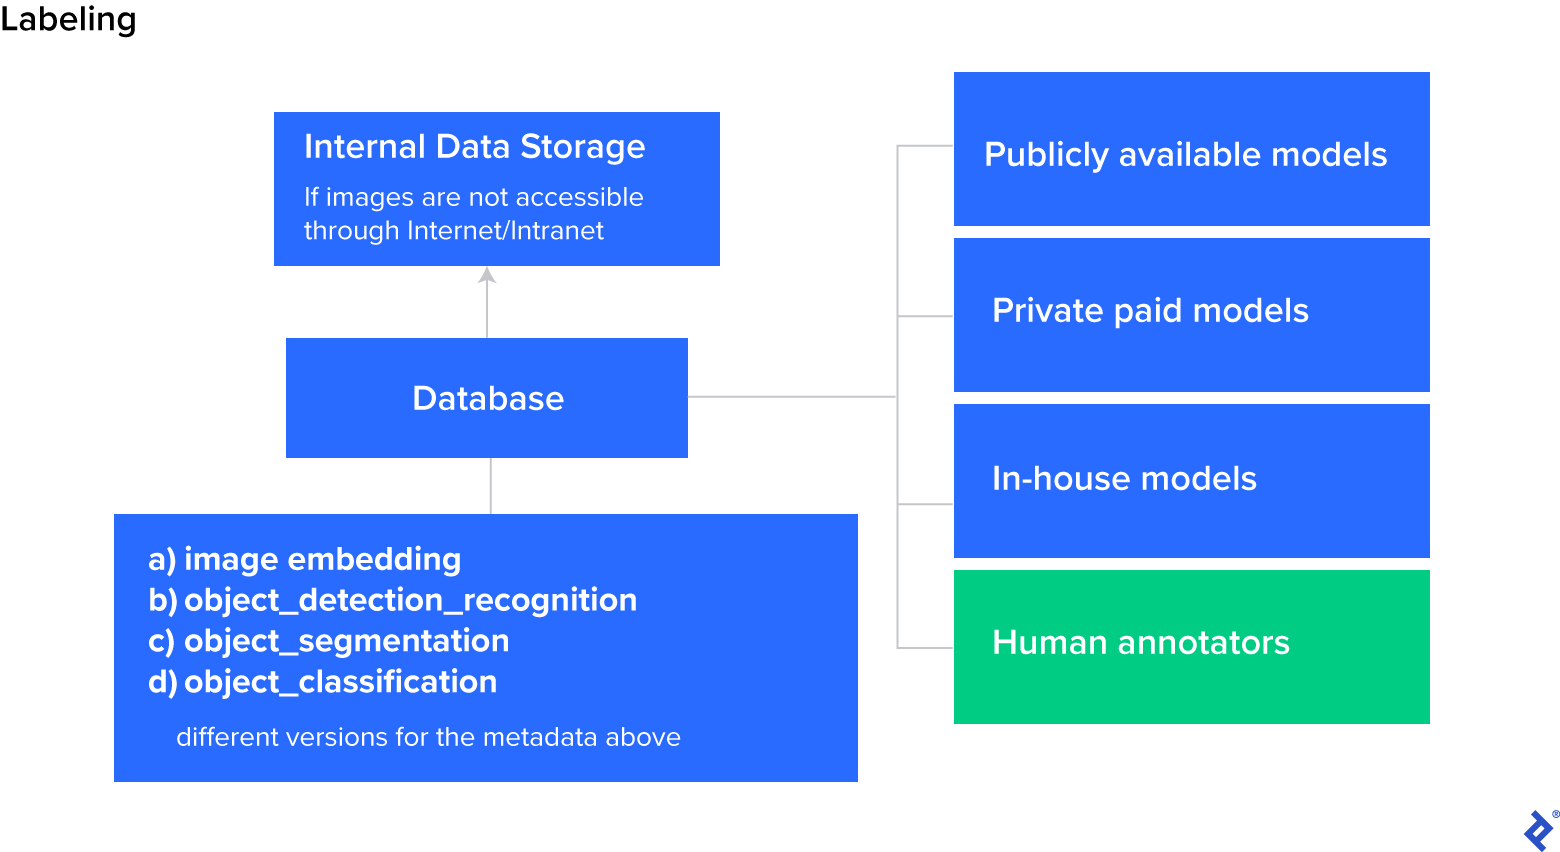 The quality assurance flowchart shows that the database relies on public, private, and in-house models, as well as human annotators.